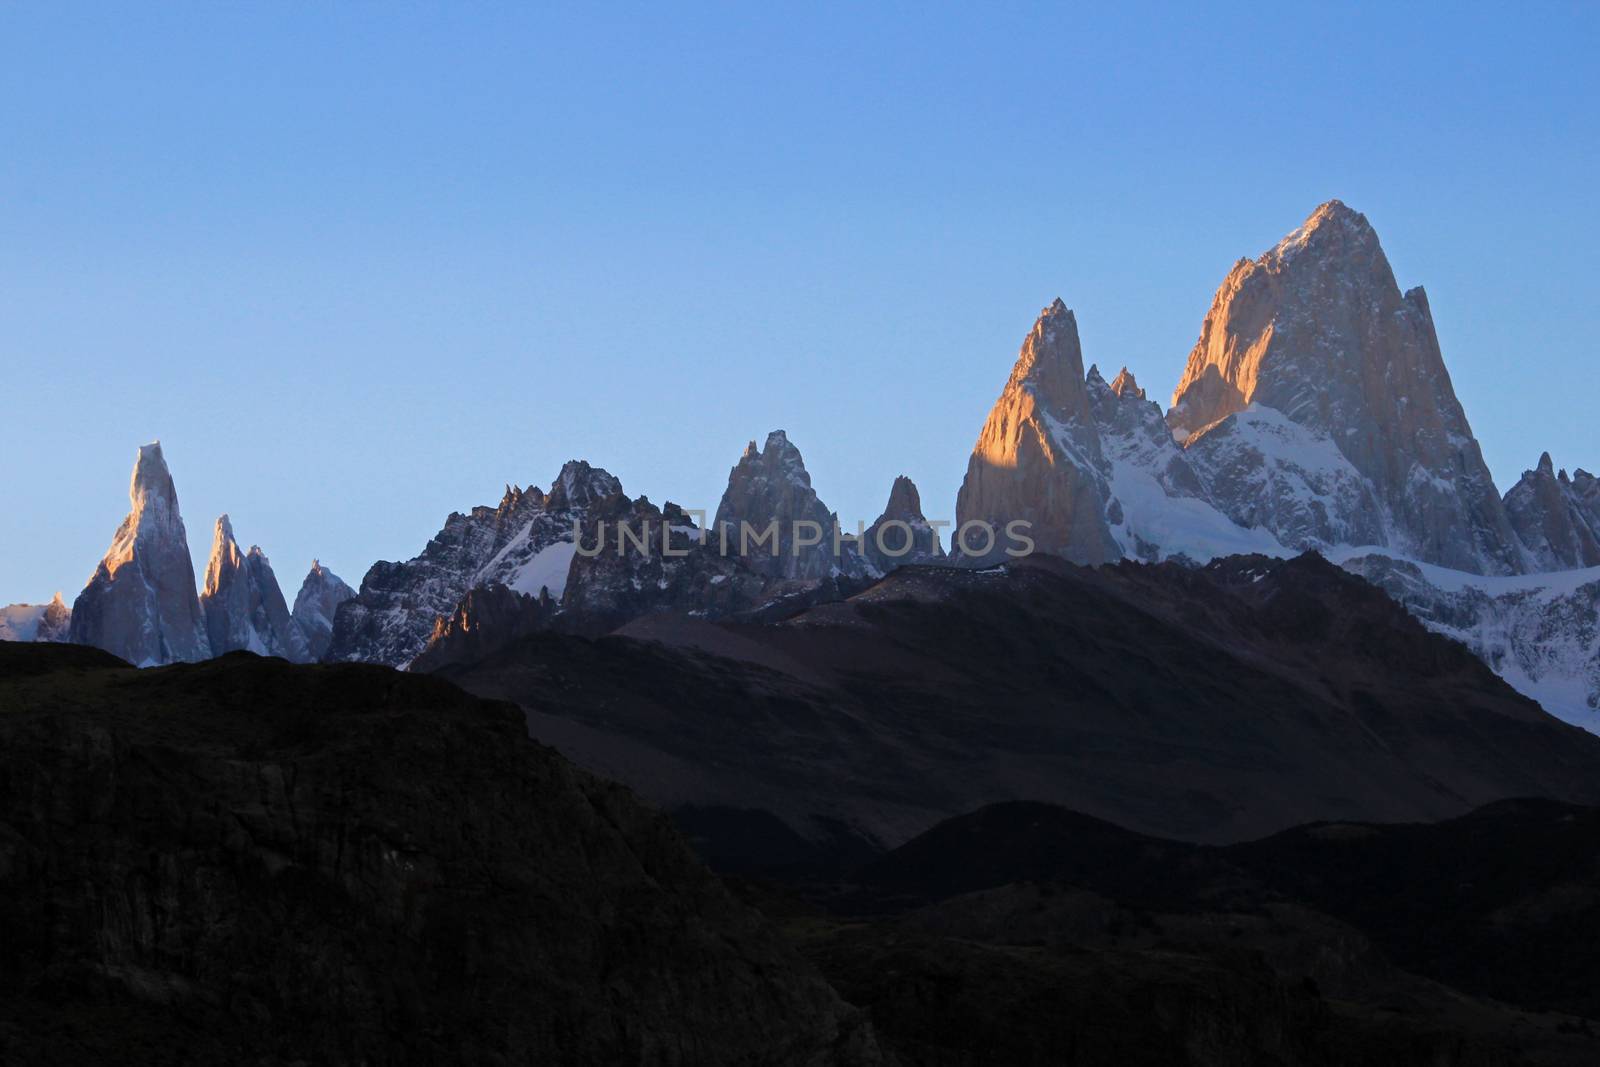 Fitz Roy and Cerro Torre mountainline at sunset, Patagonia, Argentina by cicloco